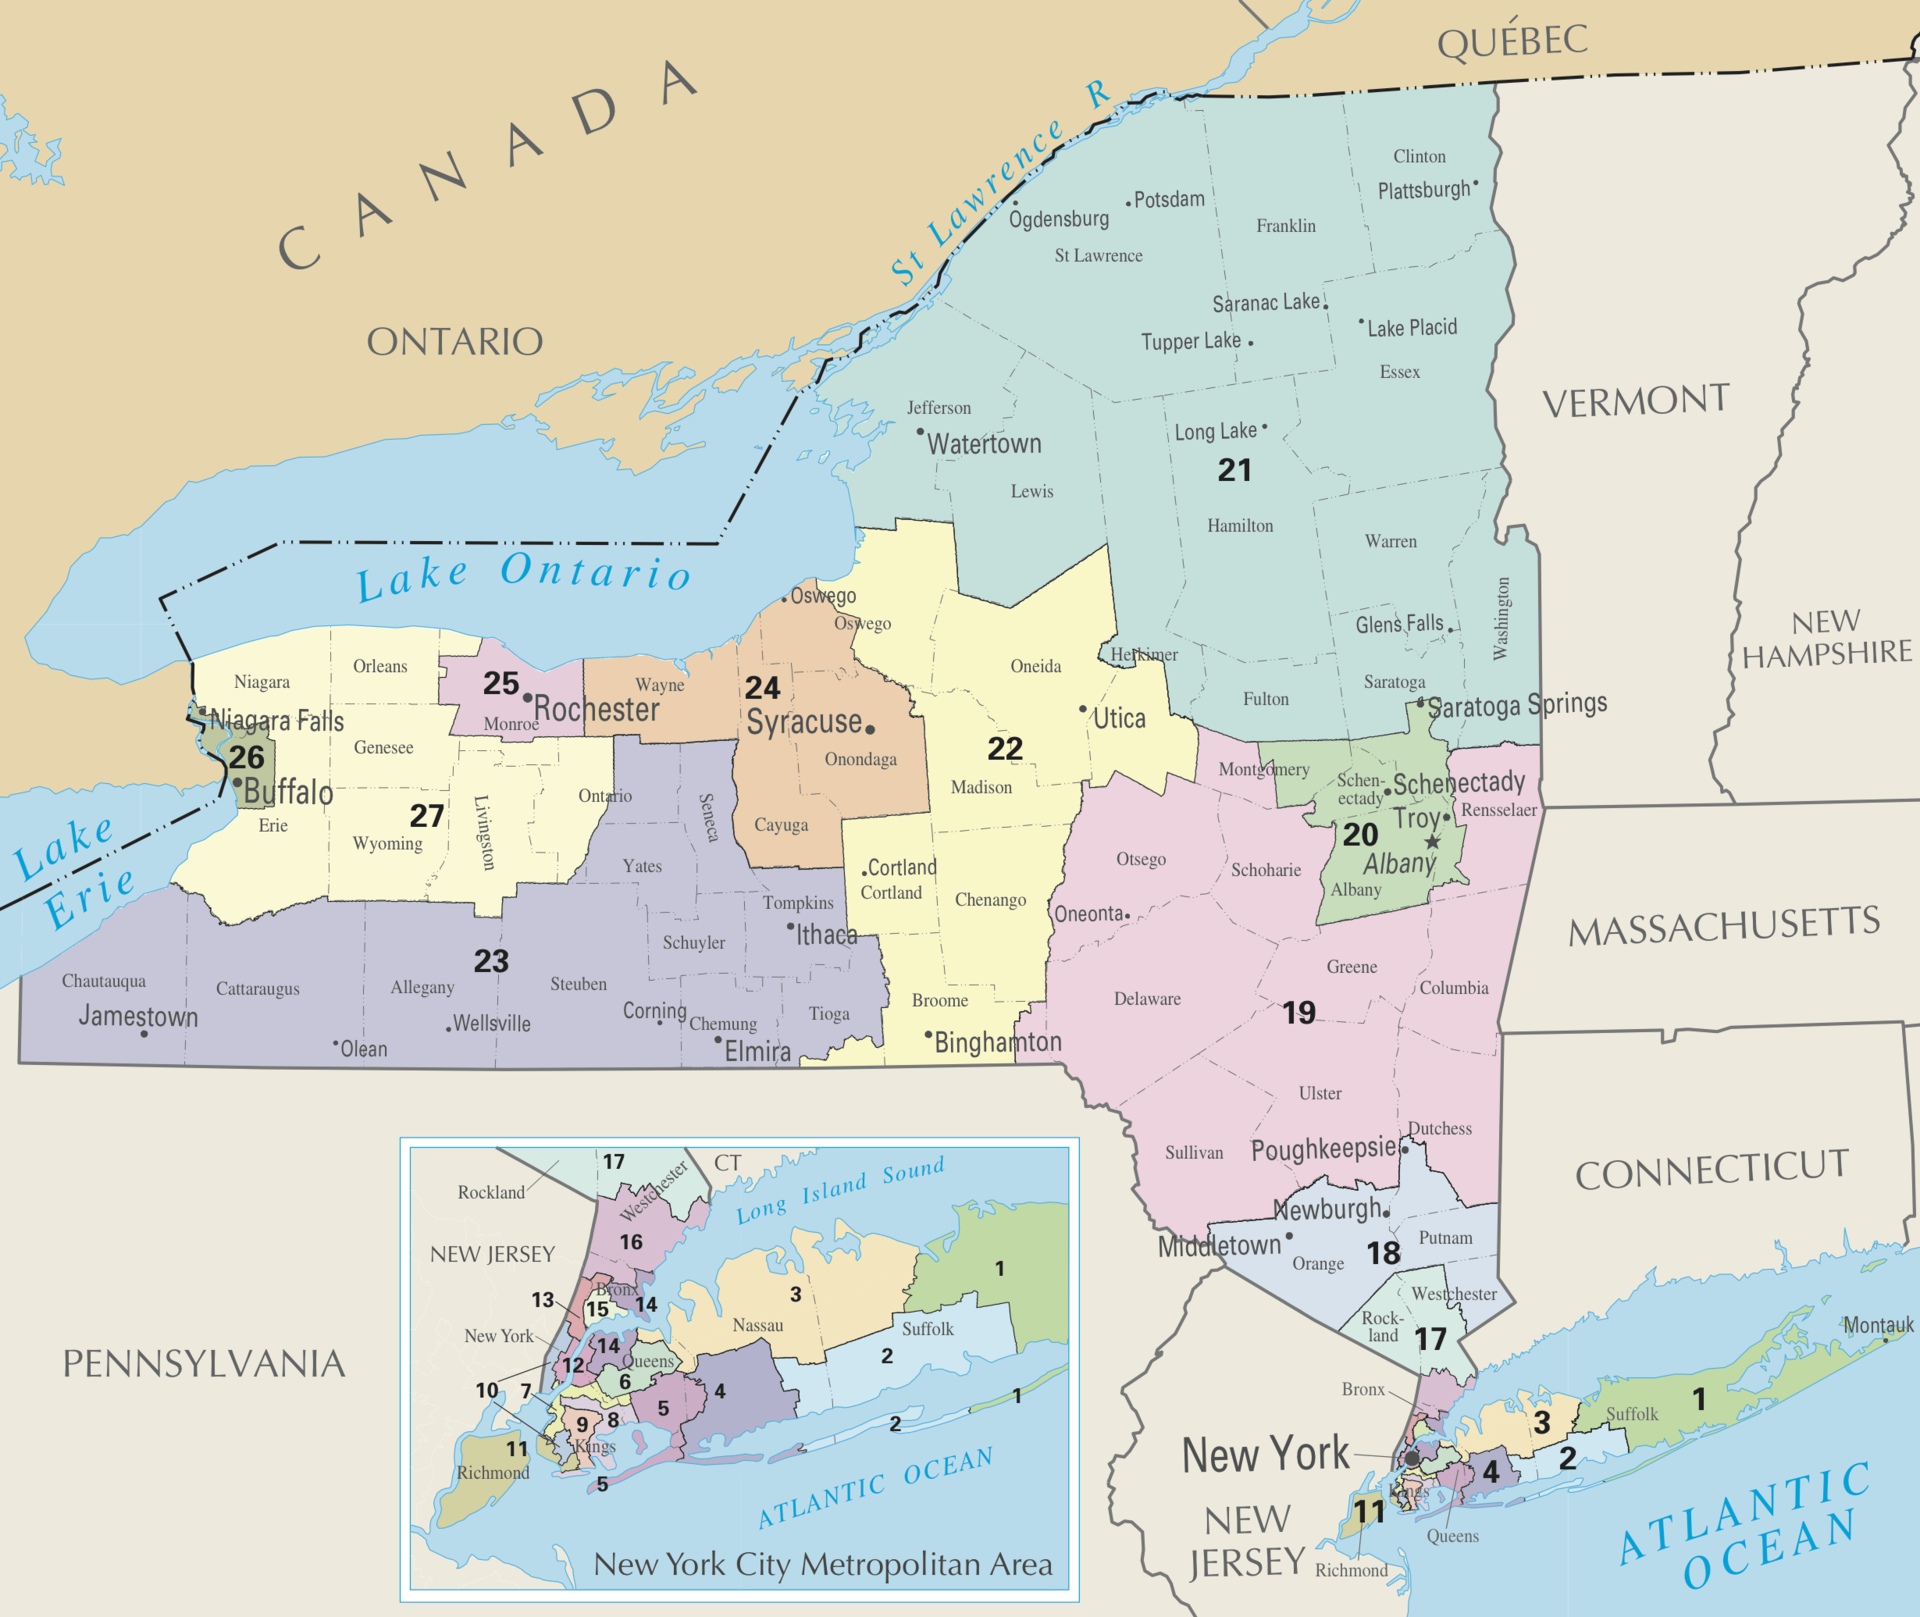 Uploaded Image: /vs-uploads/images/NYS Congressional District Map.png